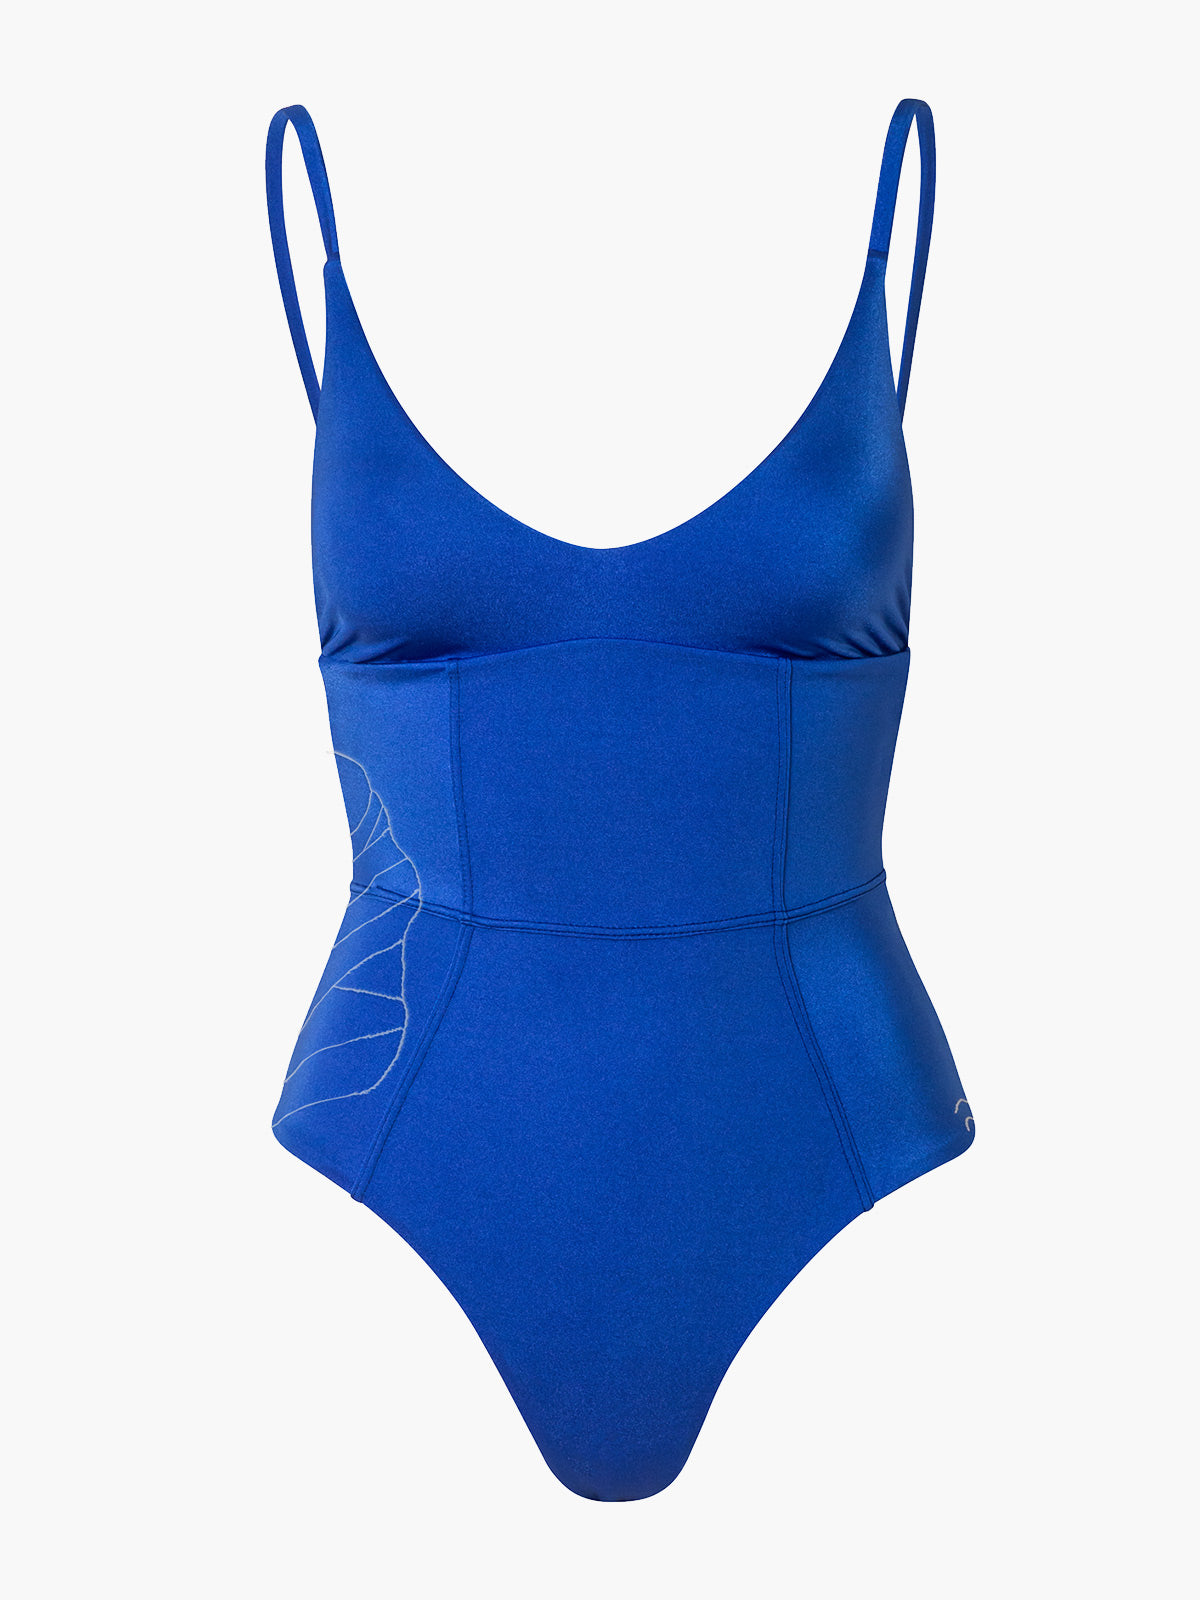 Embroidered Santo Steffano Maillot | Electric Blue